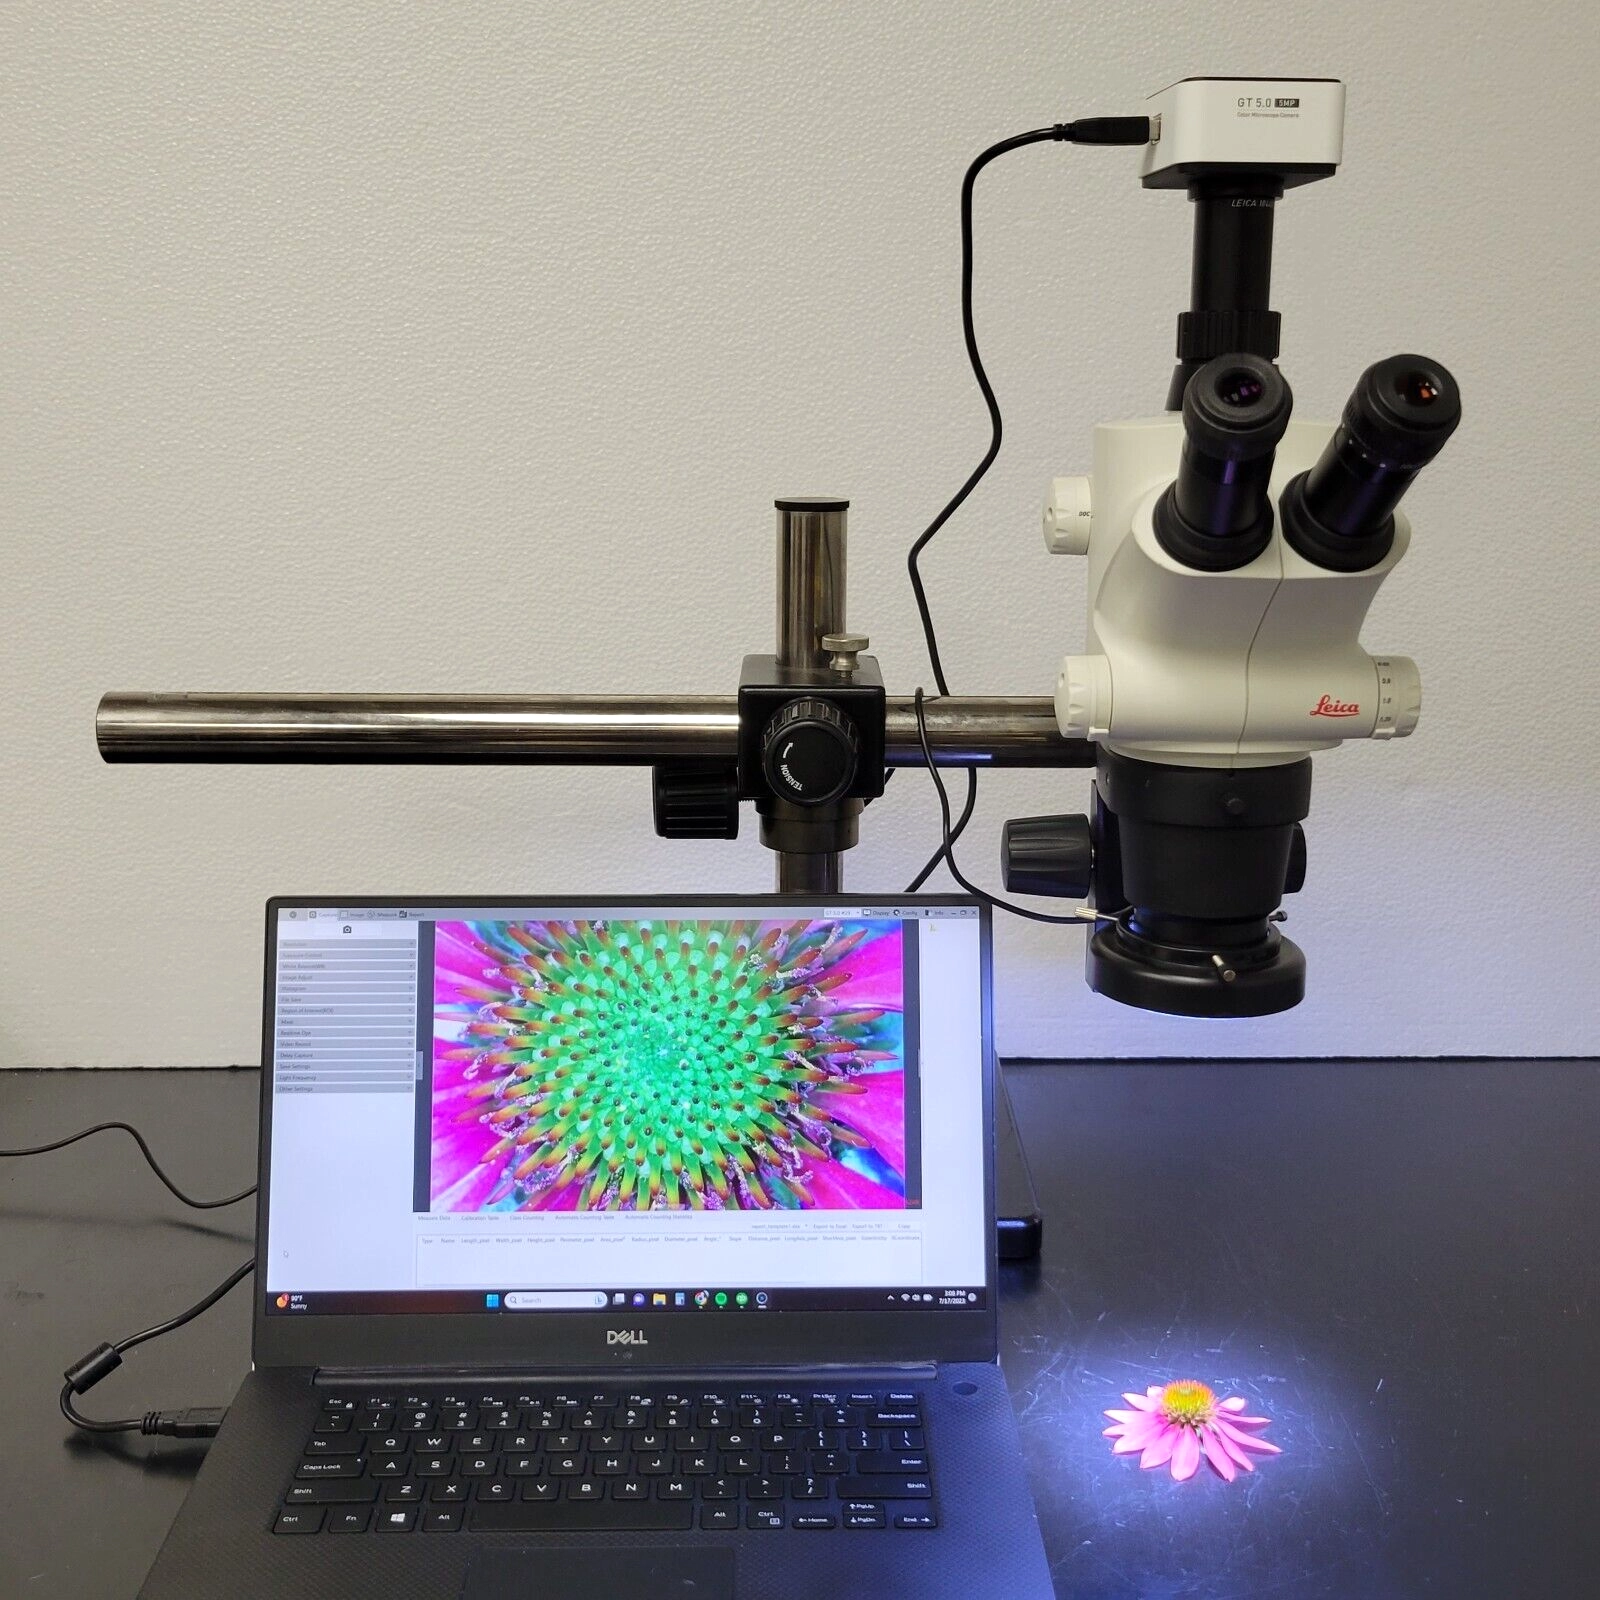 Leica Stereo Microscope S6D with Boomstand, Trinocular Pod, and Camera